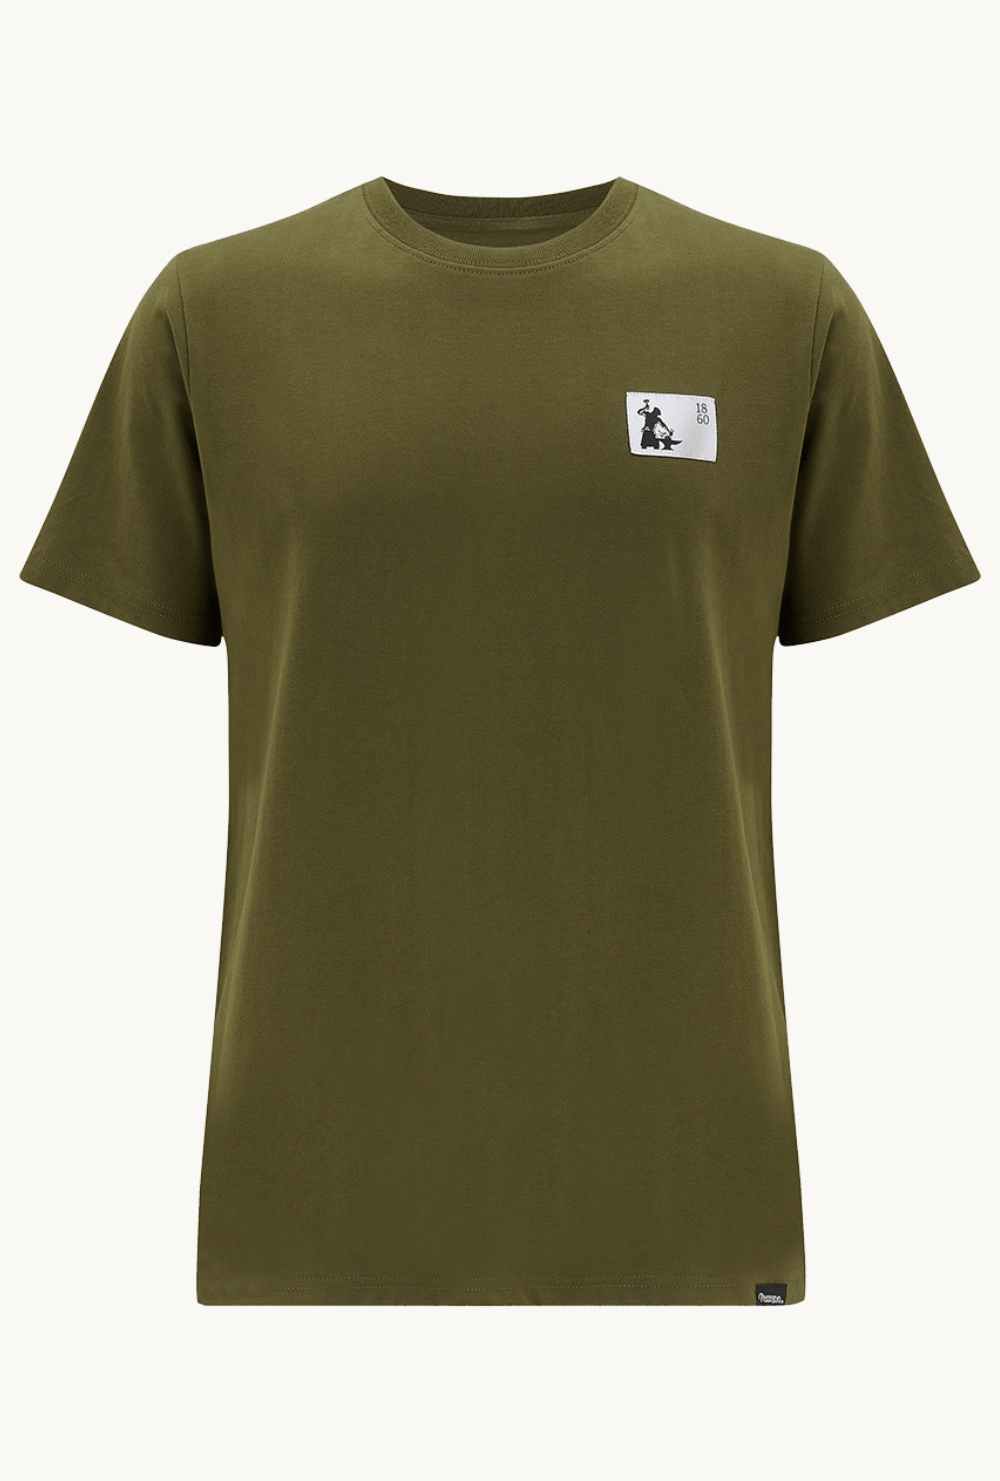 Pearson 1860  Put The Hammer Down - 100% Organic Cotton Unisex Cycling T-shirt Olive  Medium / Olive